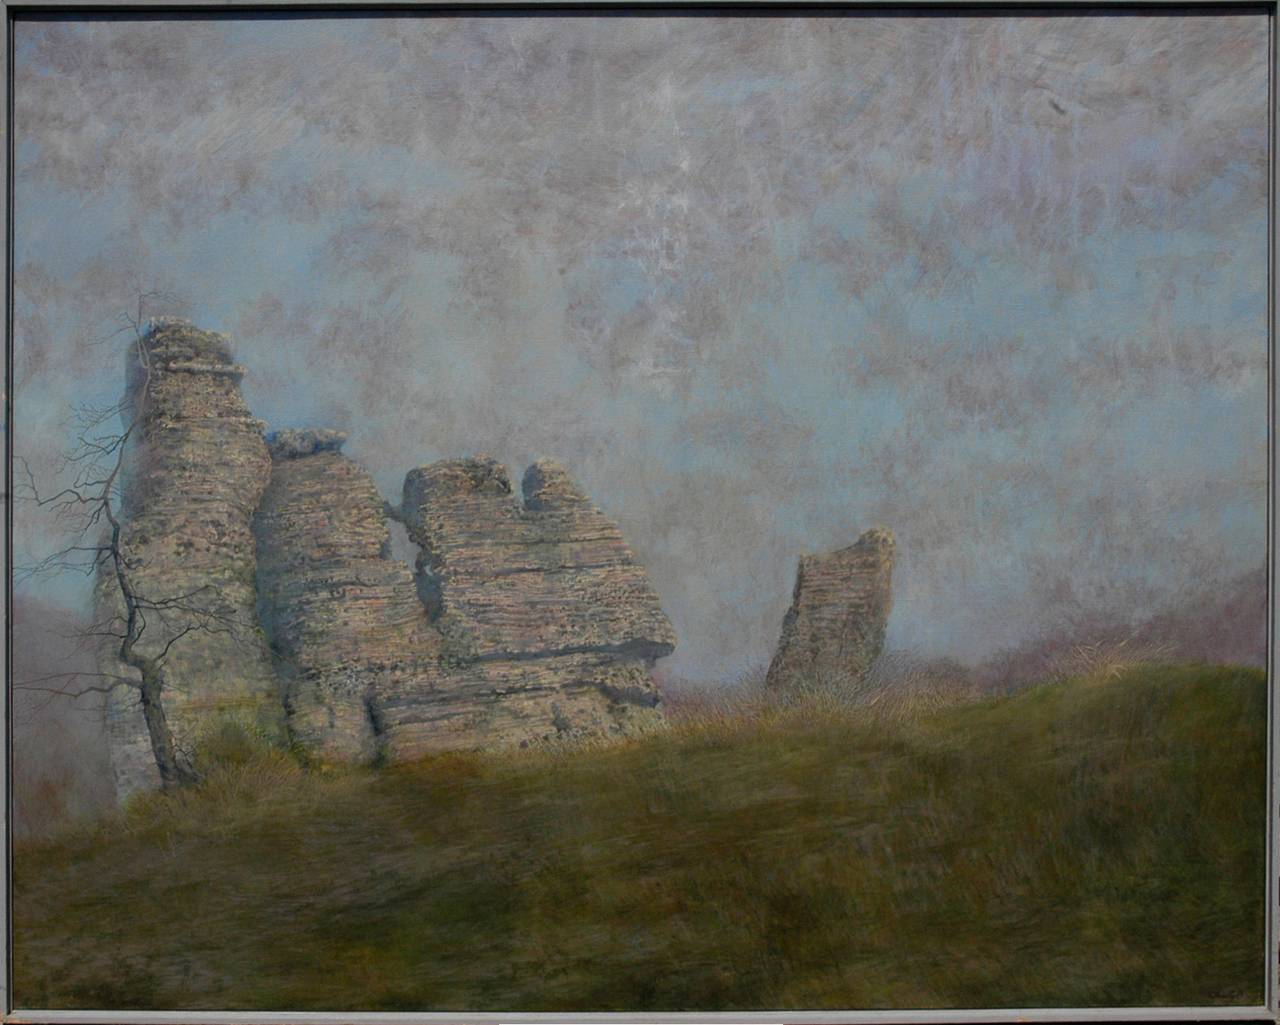 "Rock Forms in Open Field" Ancient Rock Formations  by Charles Brindley